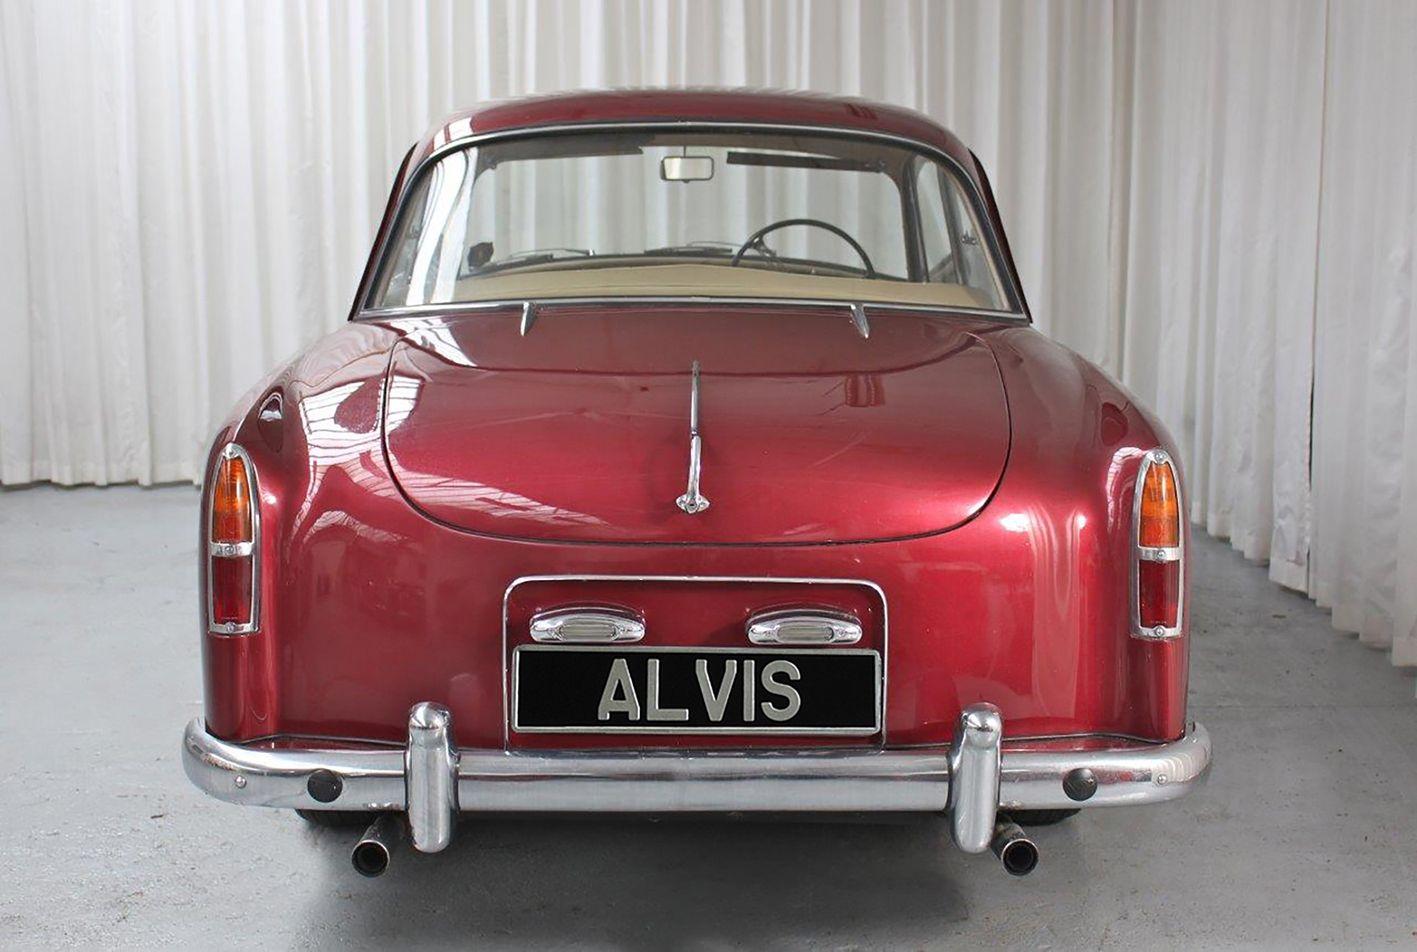 Red Triangle Automotive Logo - 61TD21SalE copy - Red Triangle - Alvis Parts, Restoration and Car Sales